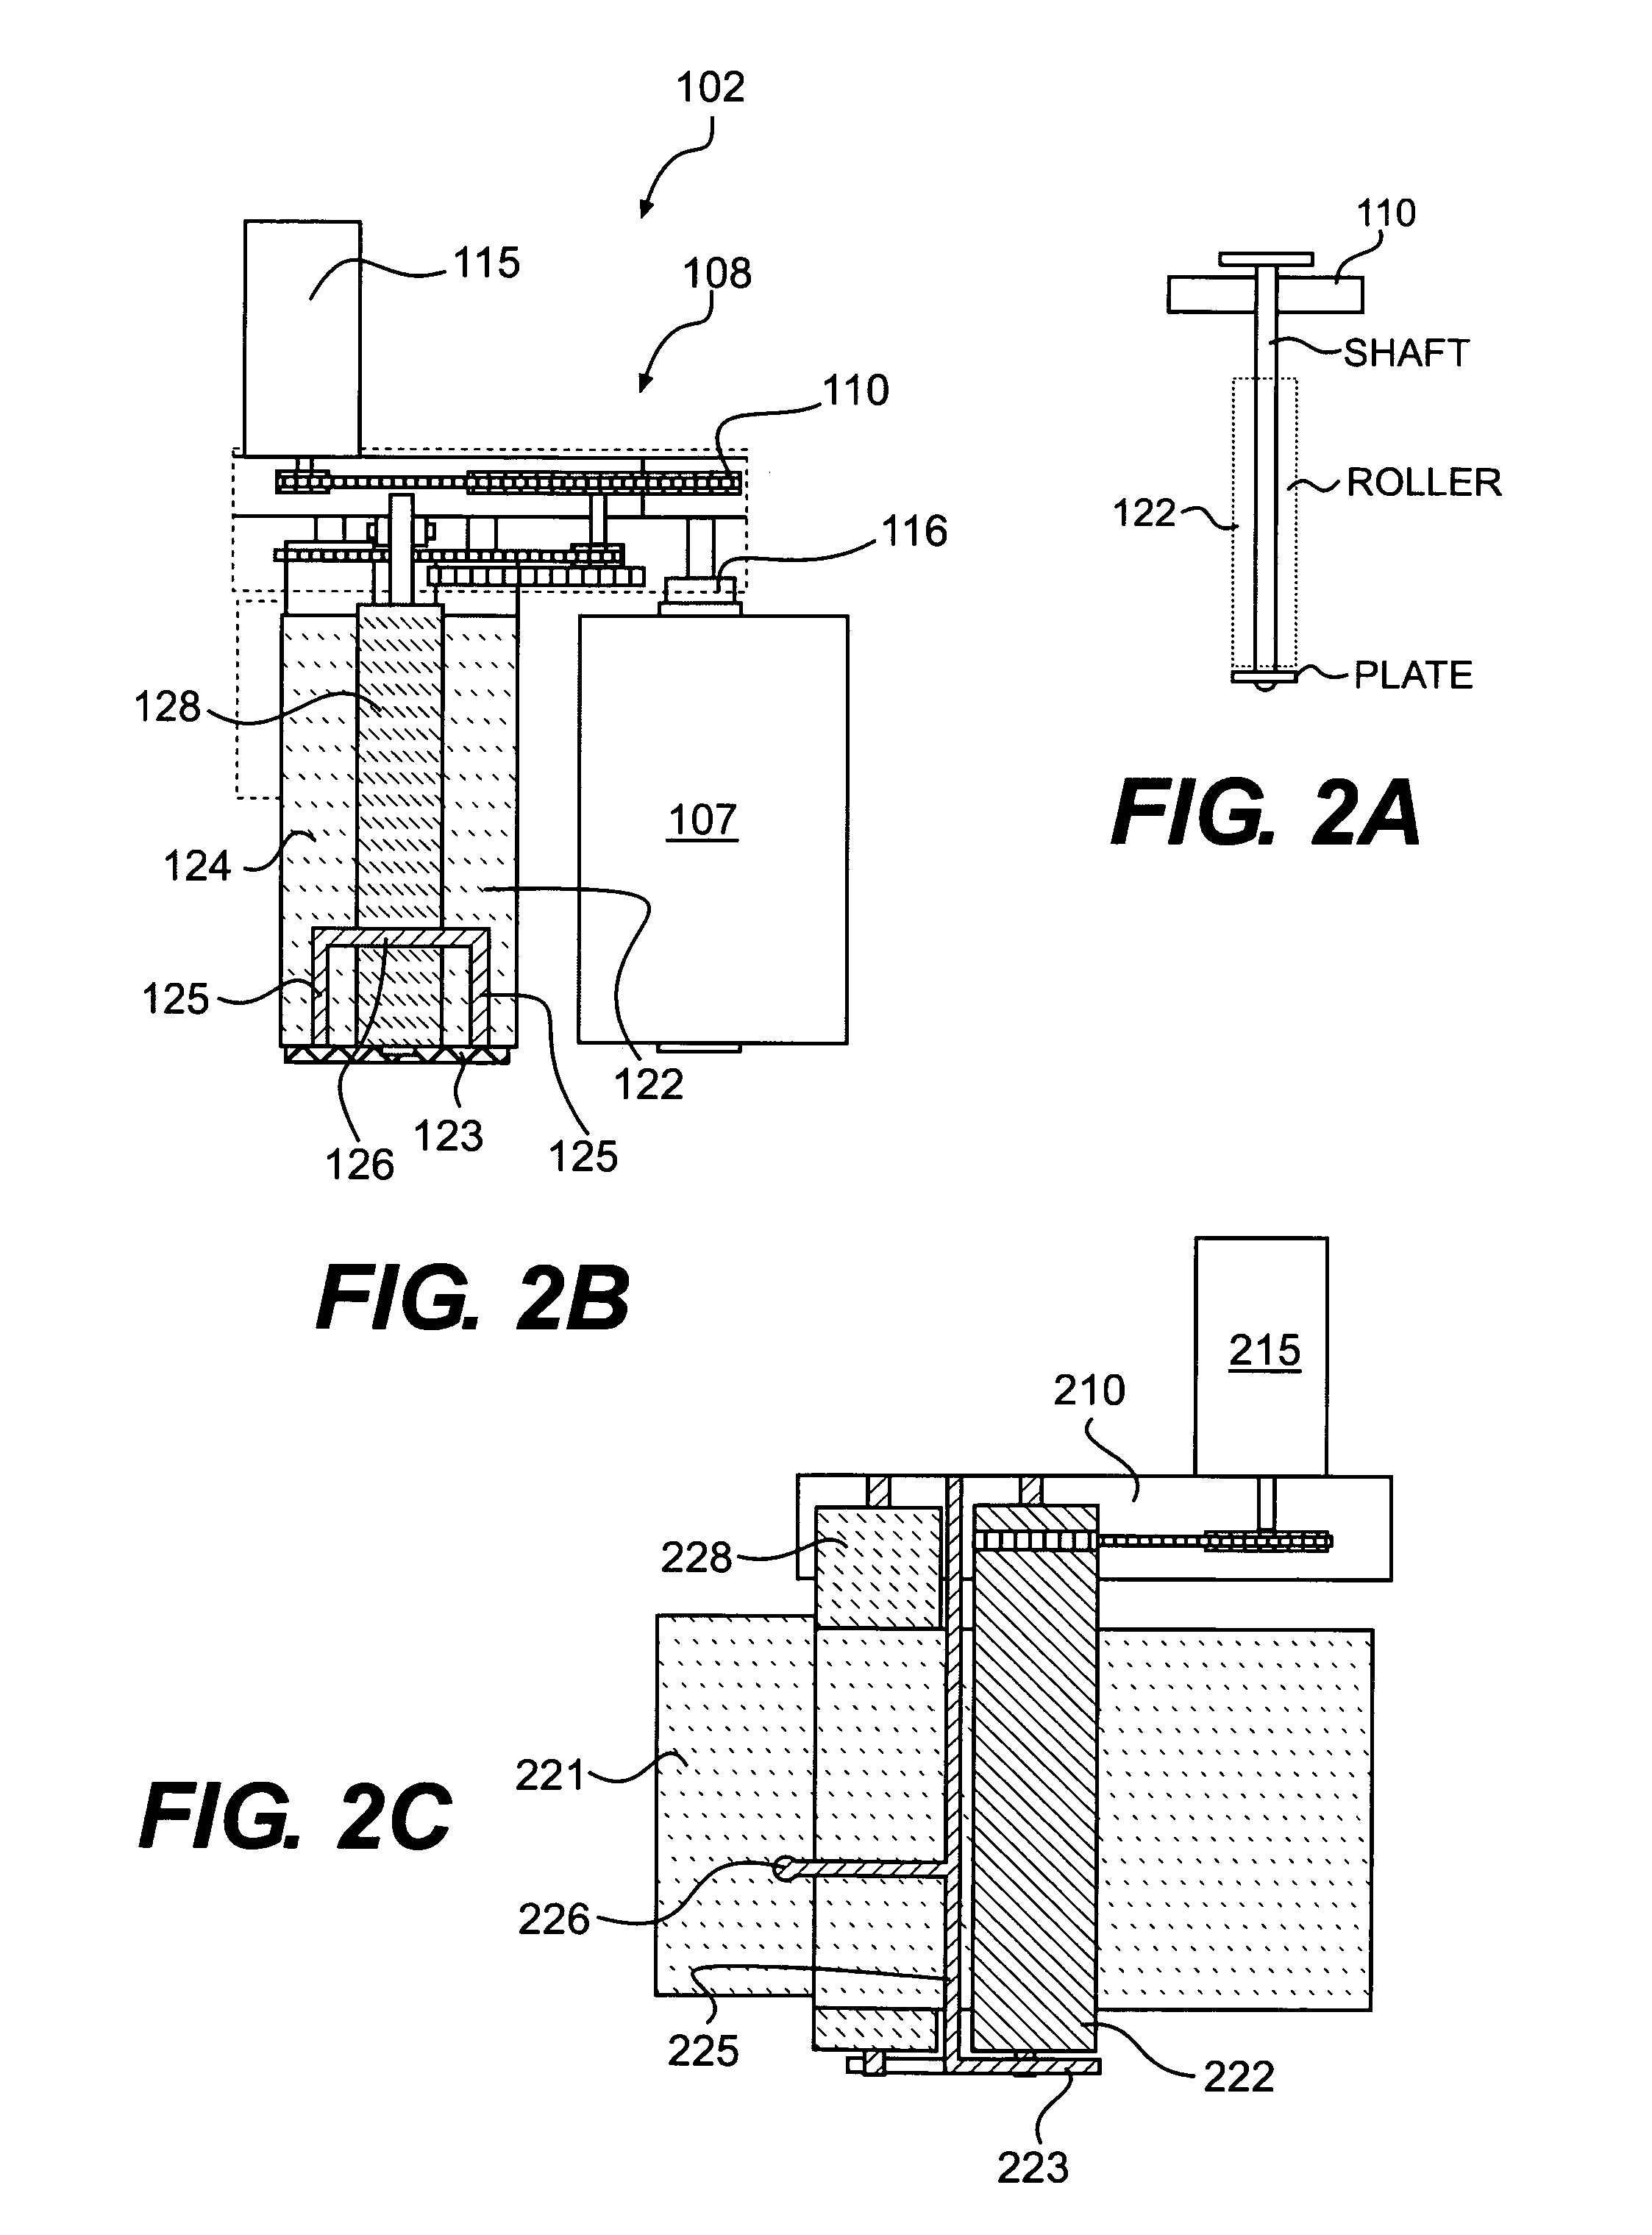 Film dispenser with pre-stretch assembly